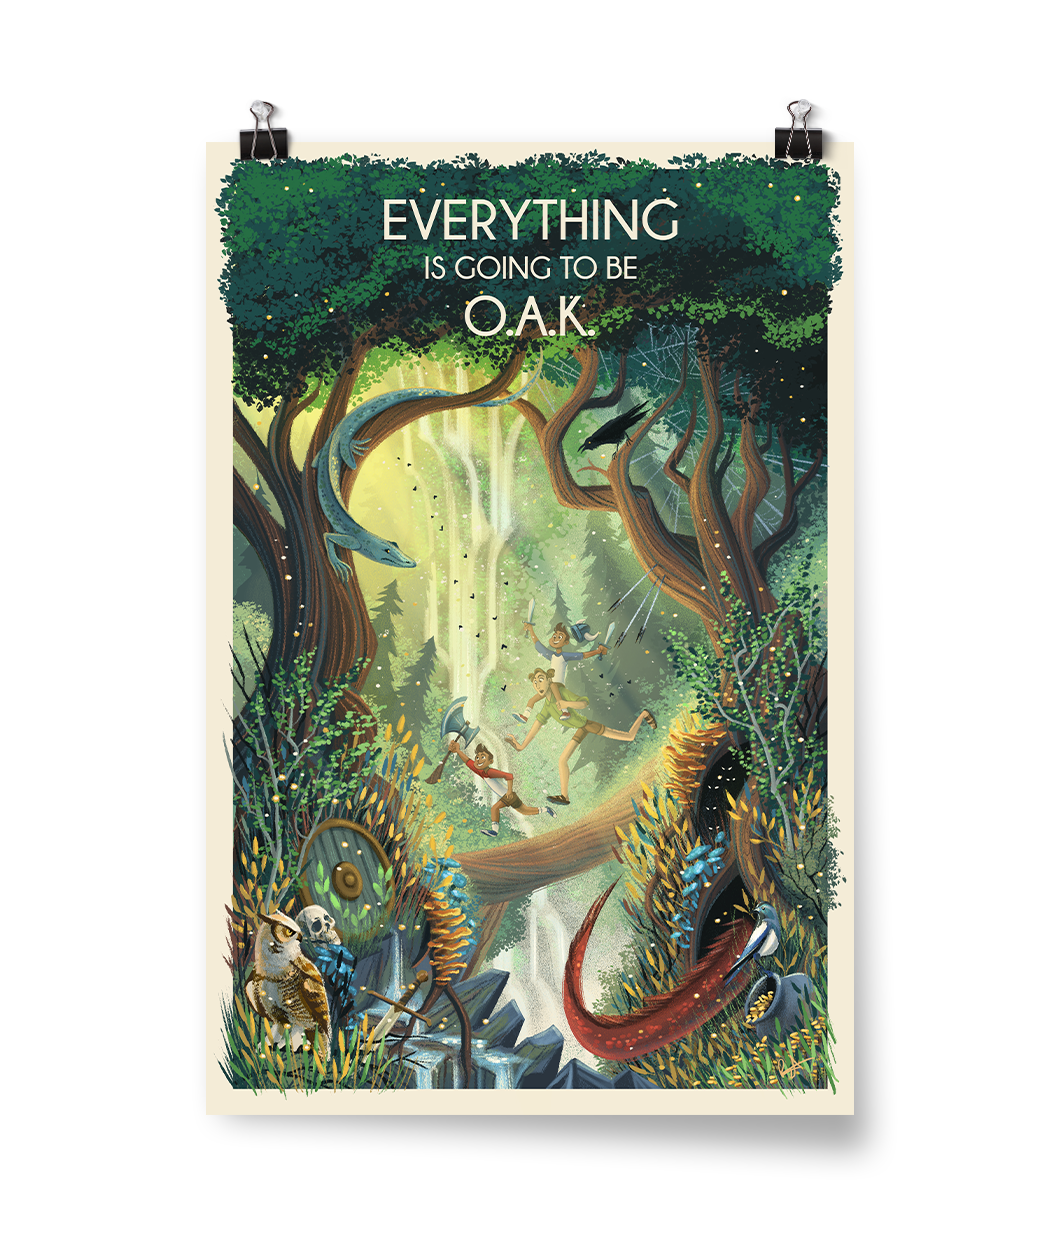 A poster of an illustrated forest and cream boarder that says EVERYTHING IS GOING TO BE O.A.K. in cream on the top.